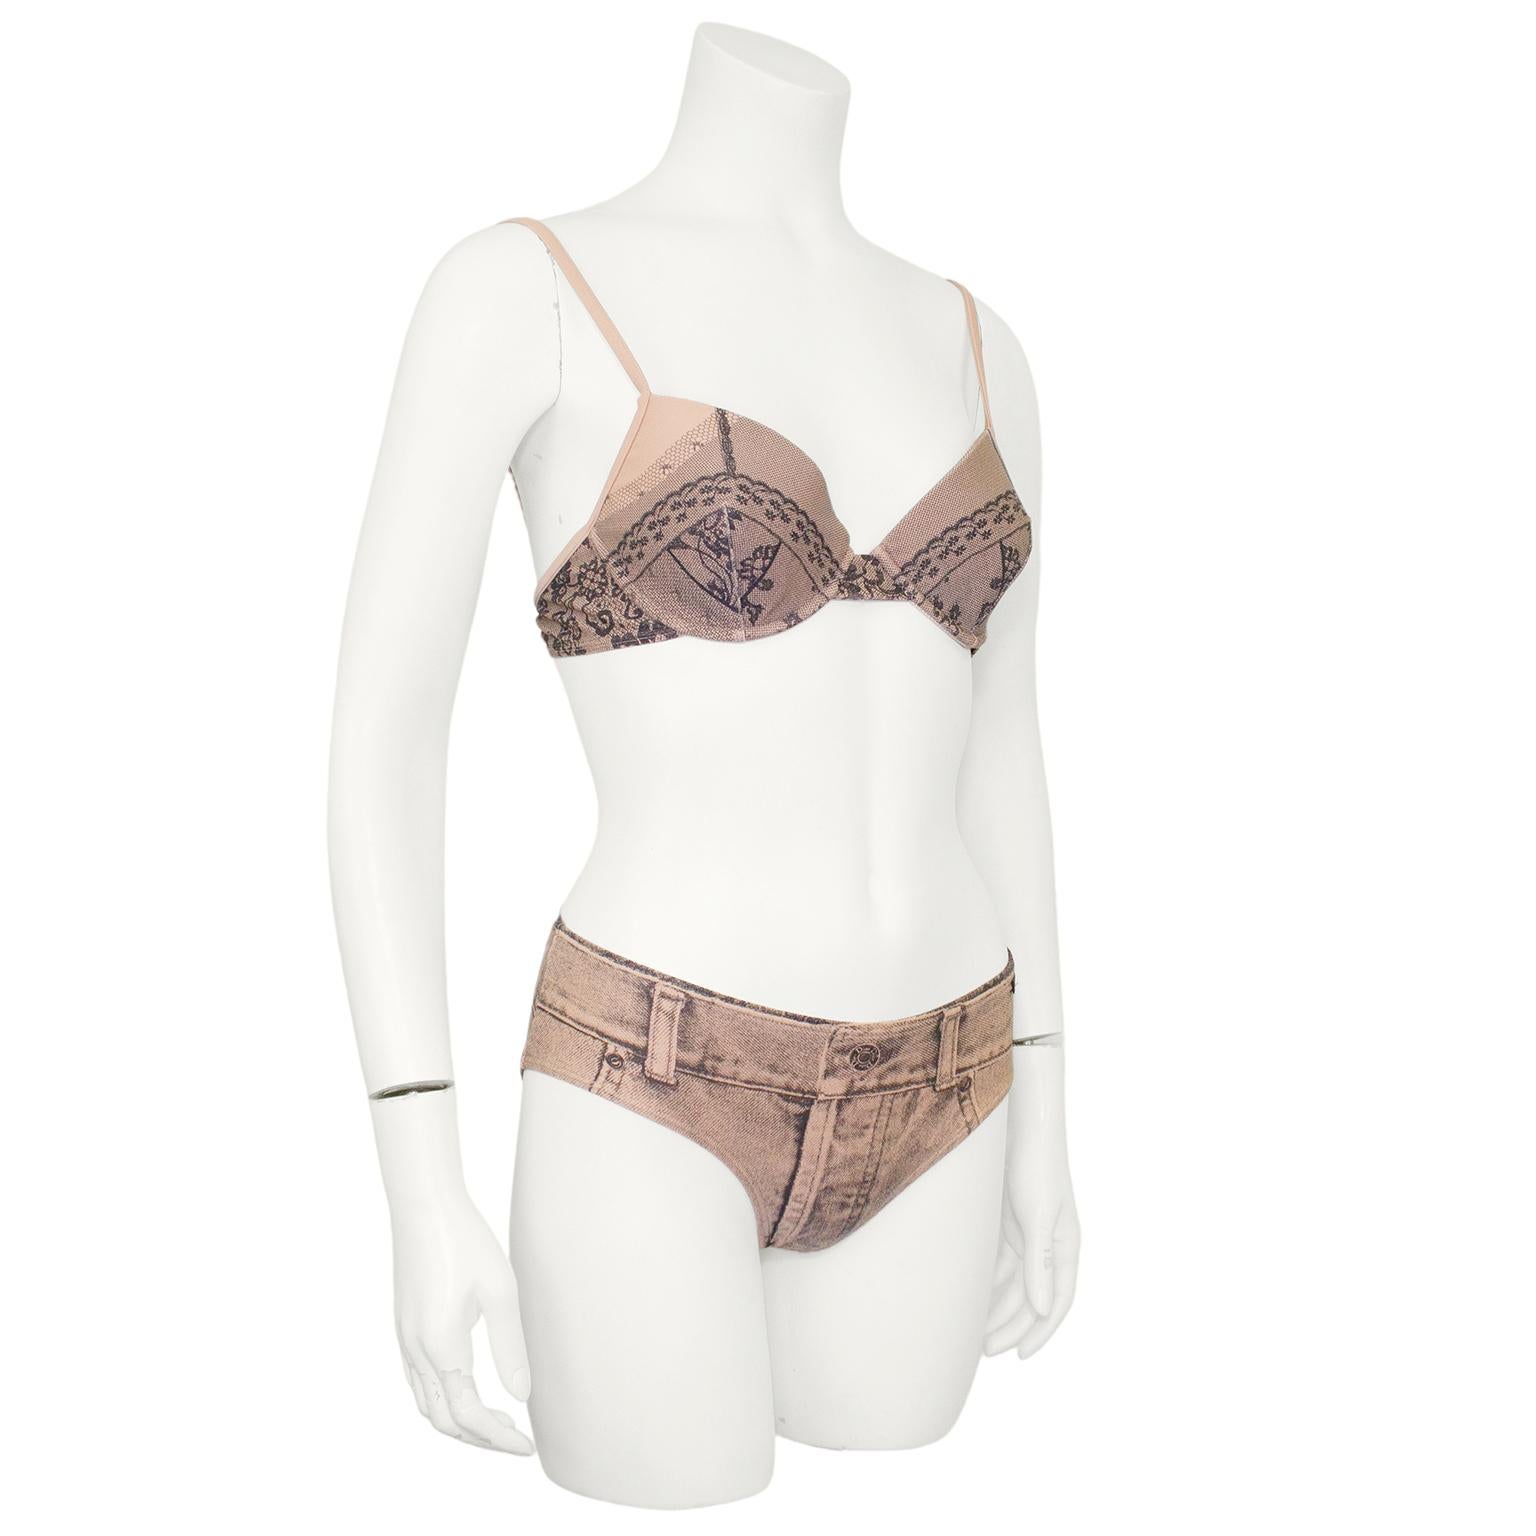 Dior bikini from Spring/Summer 2006. Muted peach colour with trompe l'oeil printed lace on the top and denim on the bottoms. Balconette style top with underwire and a heavy silver metal Dior engraved horizontal snap clasp. Classic mid rise bikini